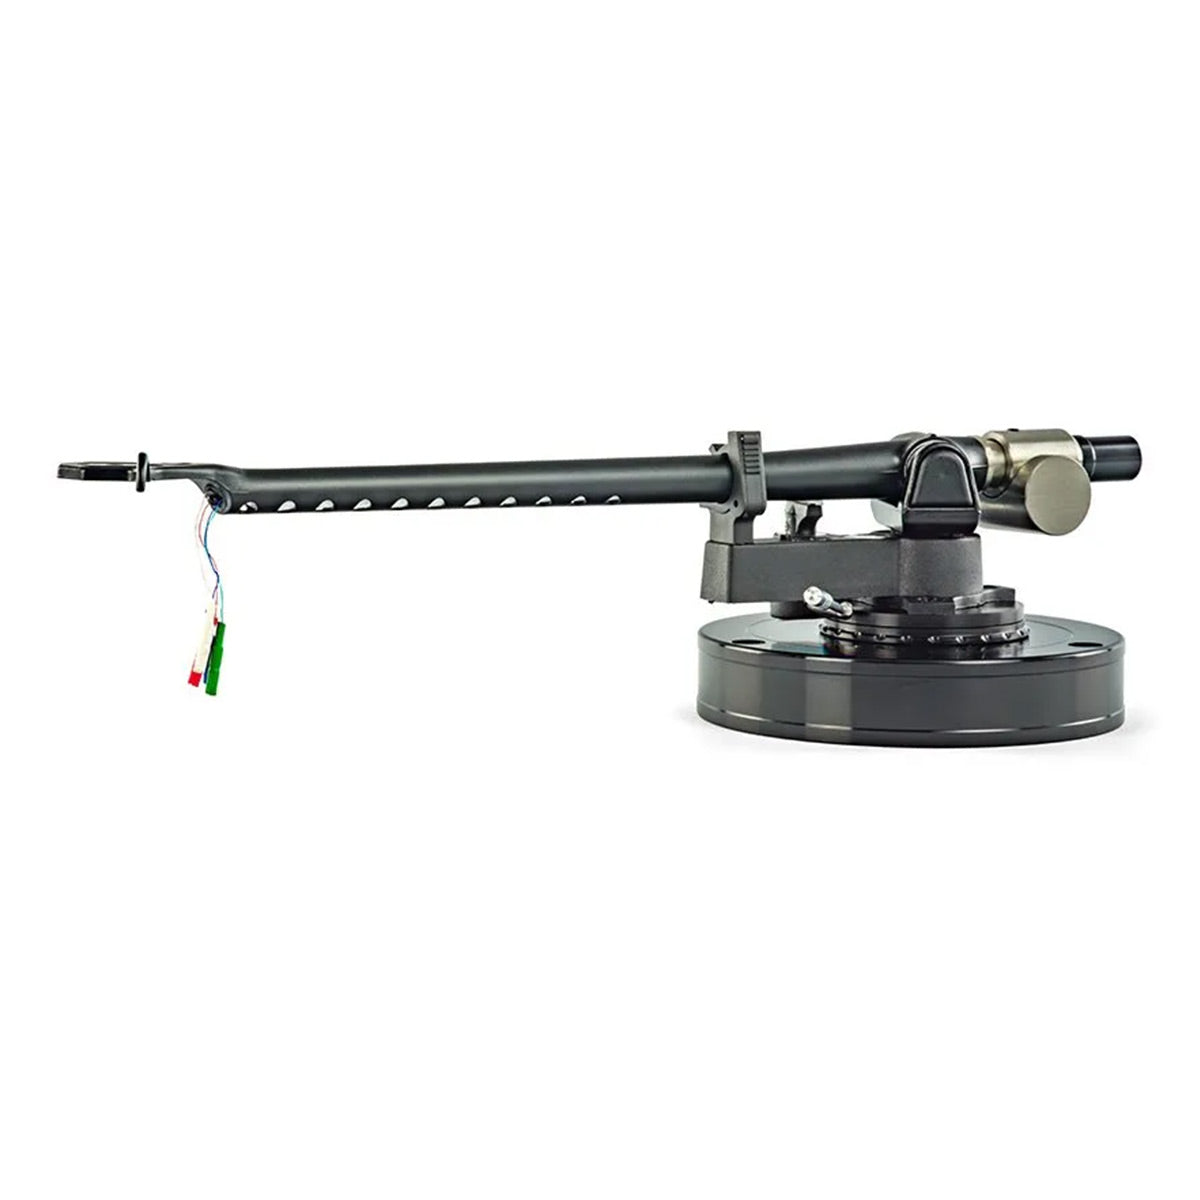 Michell Gyrodec Turntable with TecnoArm 2 Tonearm